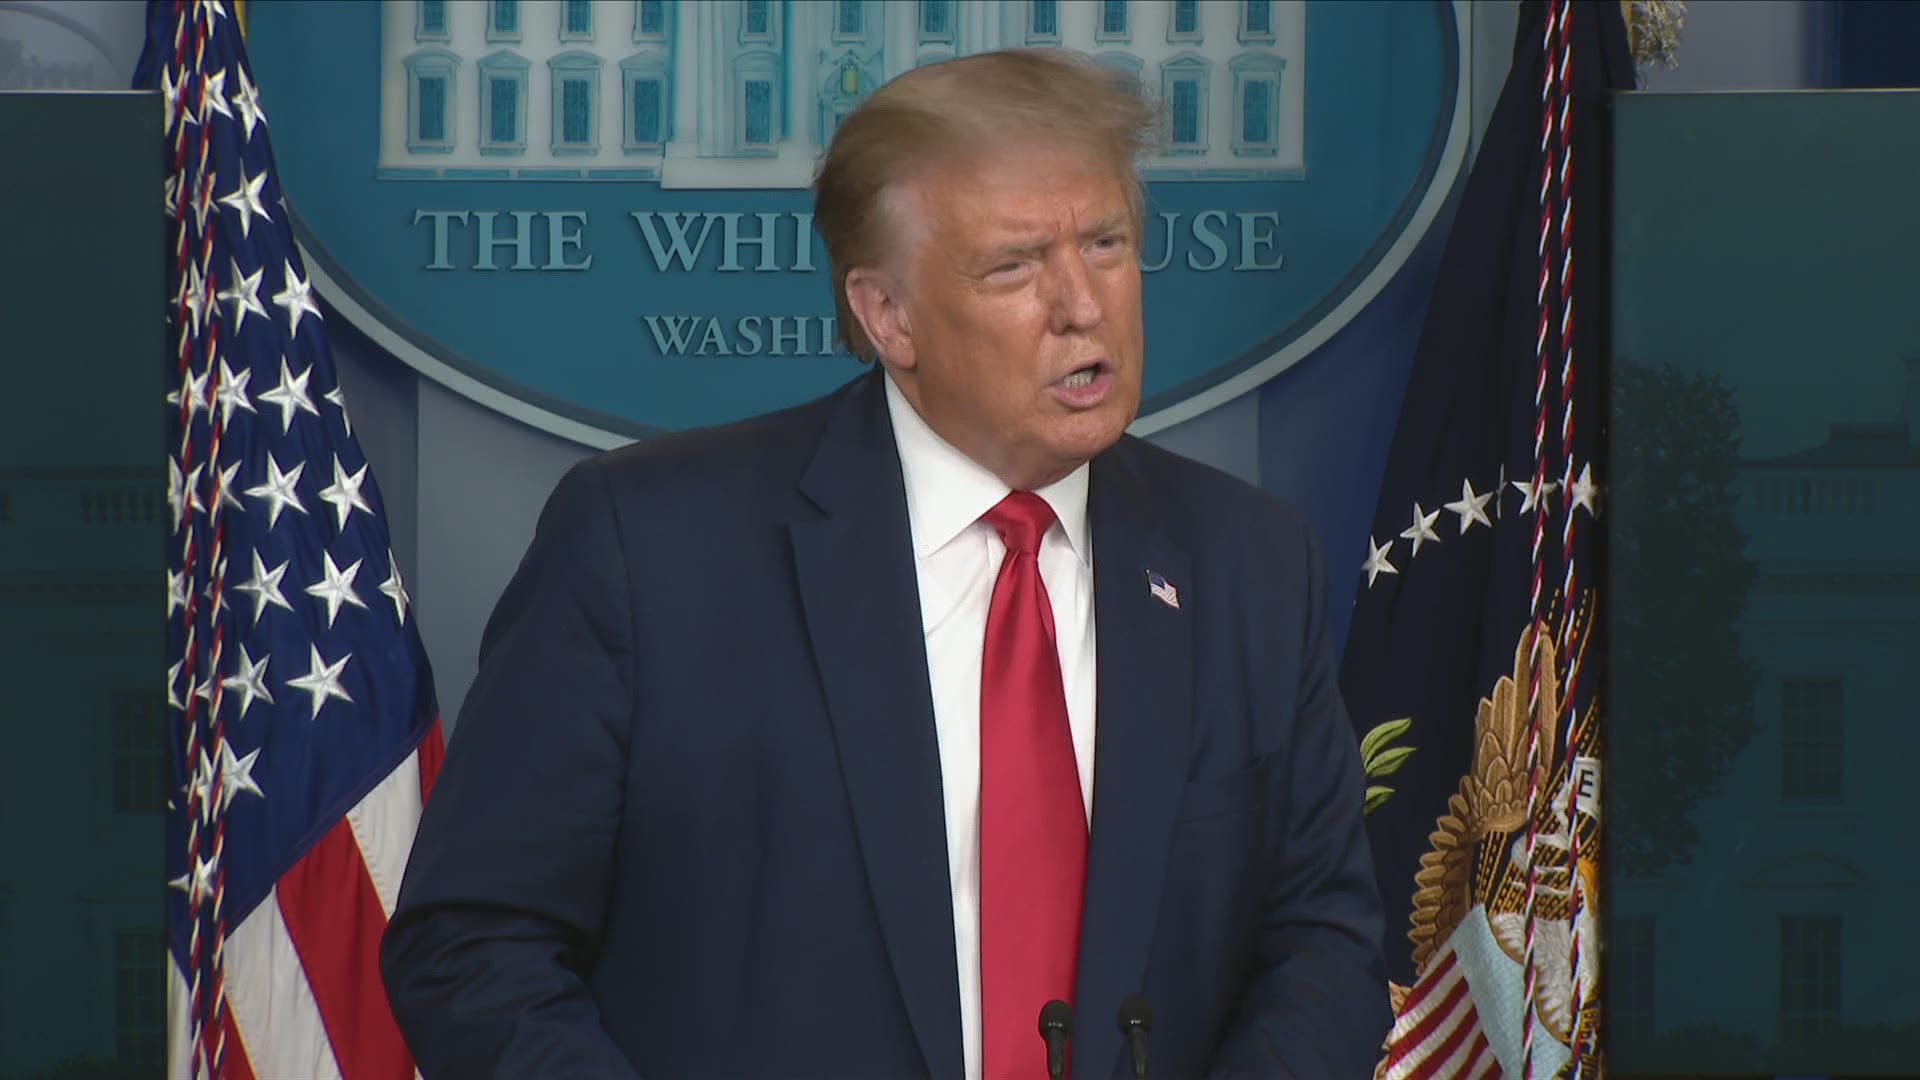 When asked about current views regarding mail-in ballots in 2020, President Trump said 'they're using COVID' to get more widespread use of mail-in ballot voting.